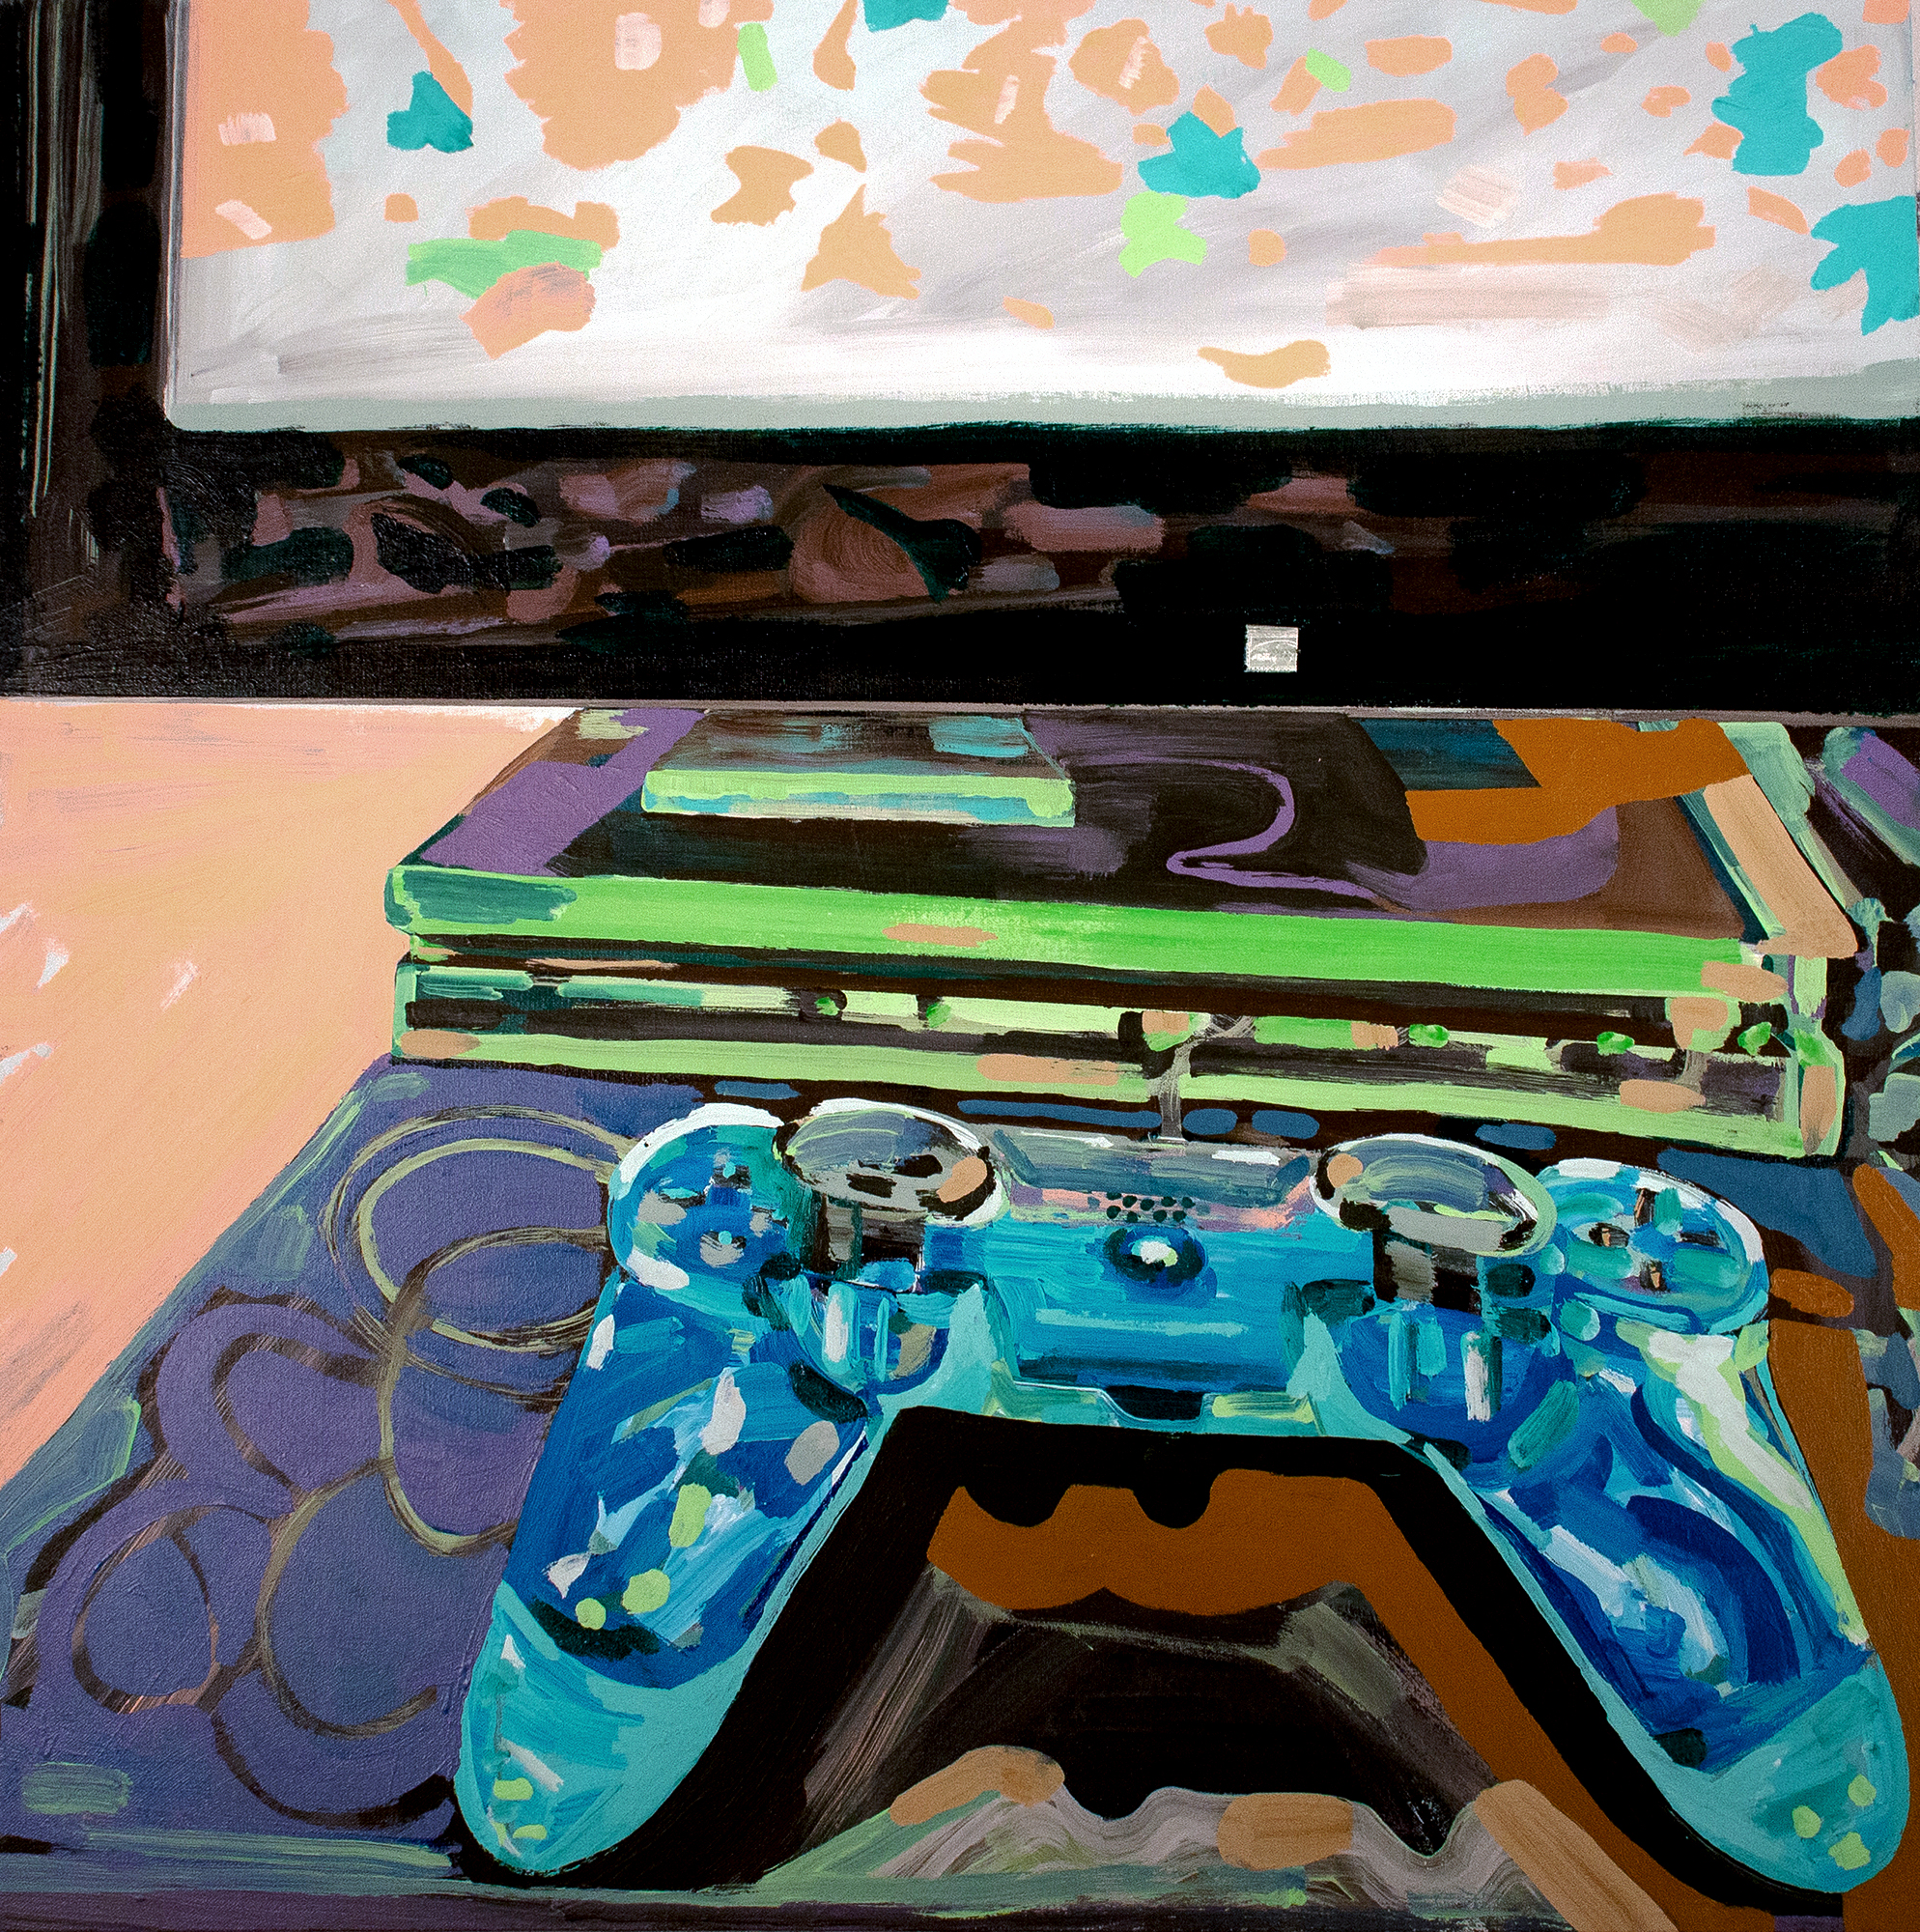 PS4 with Blue Controller